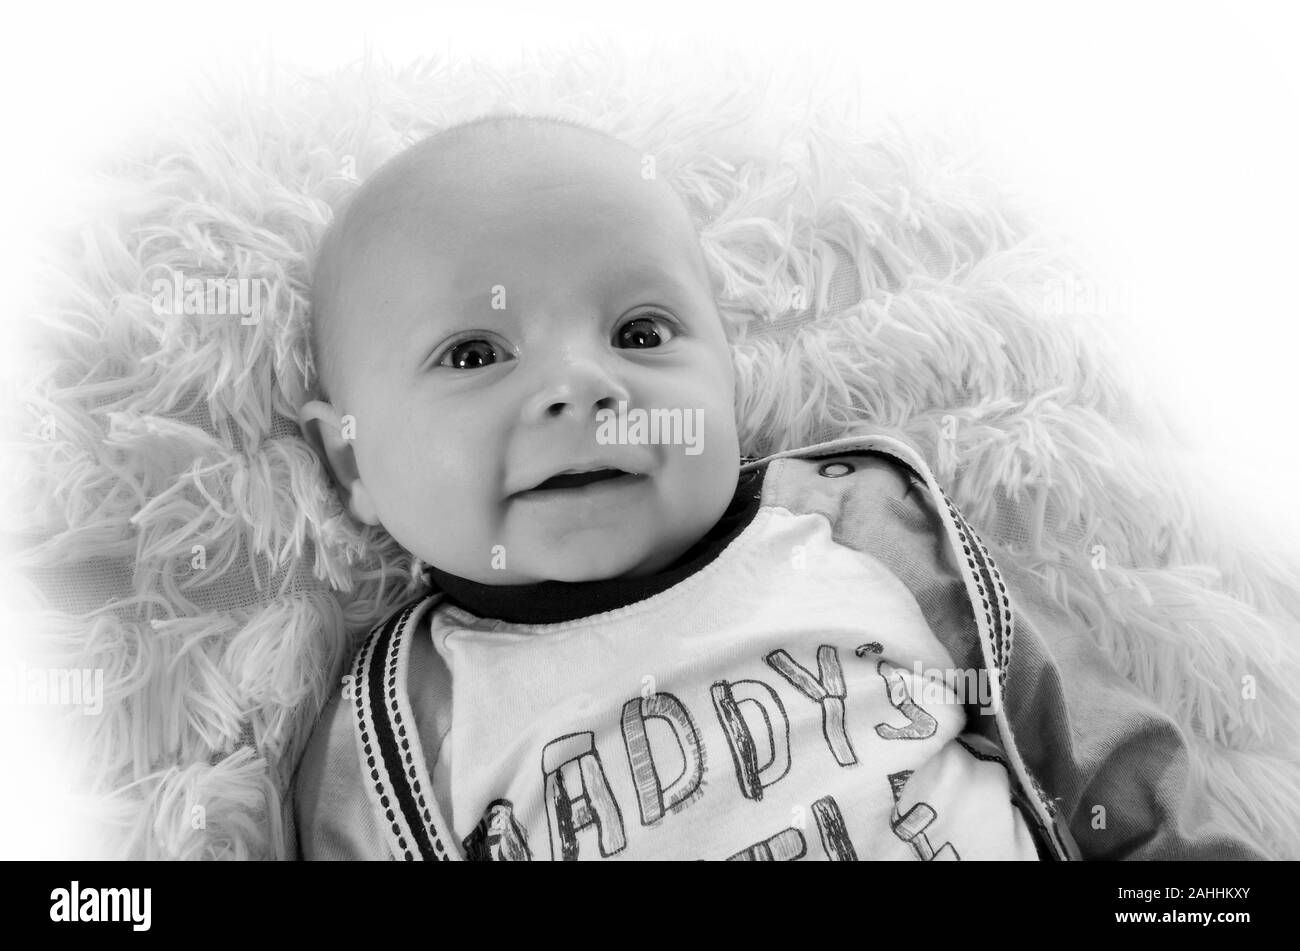 Baby laughing, happy Infant Stock Photo